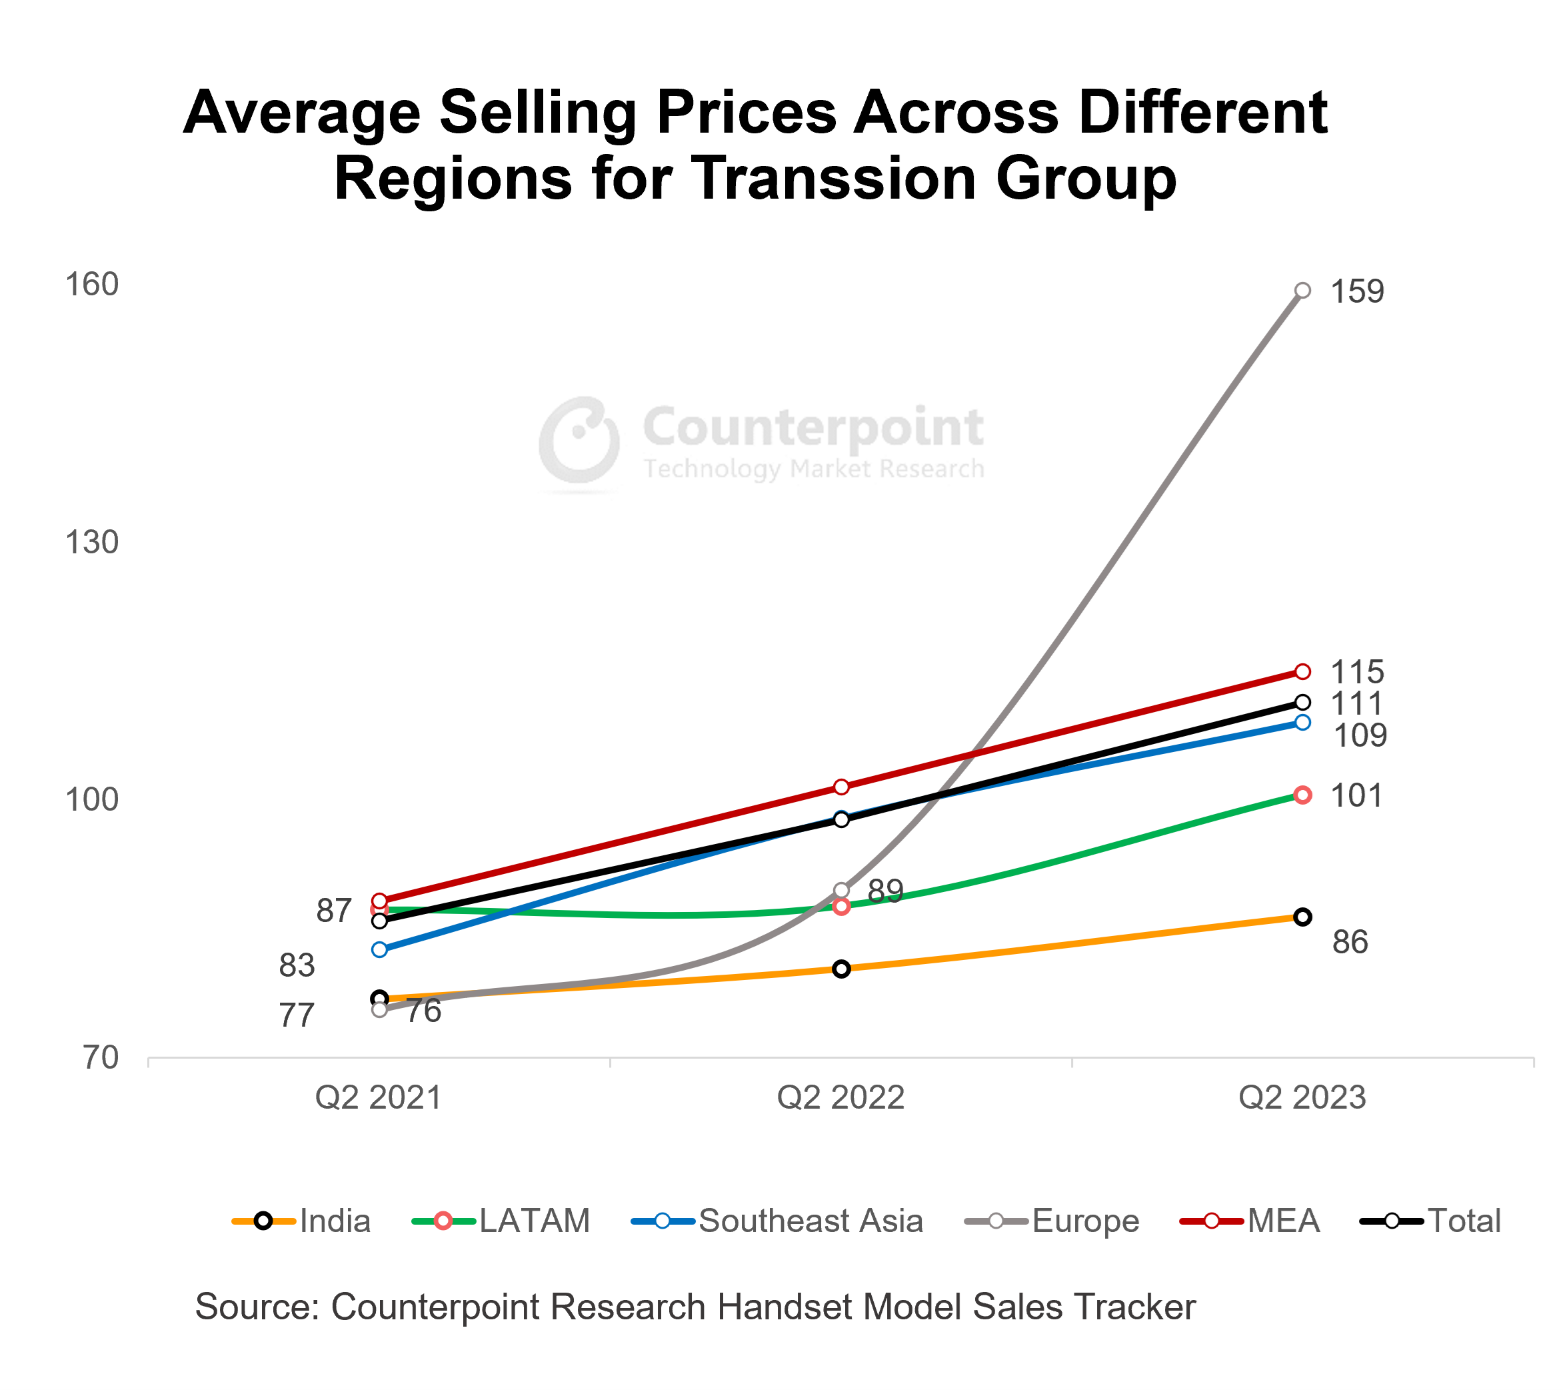 Average selling prices across different regions for transsion group